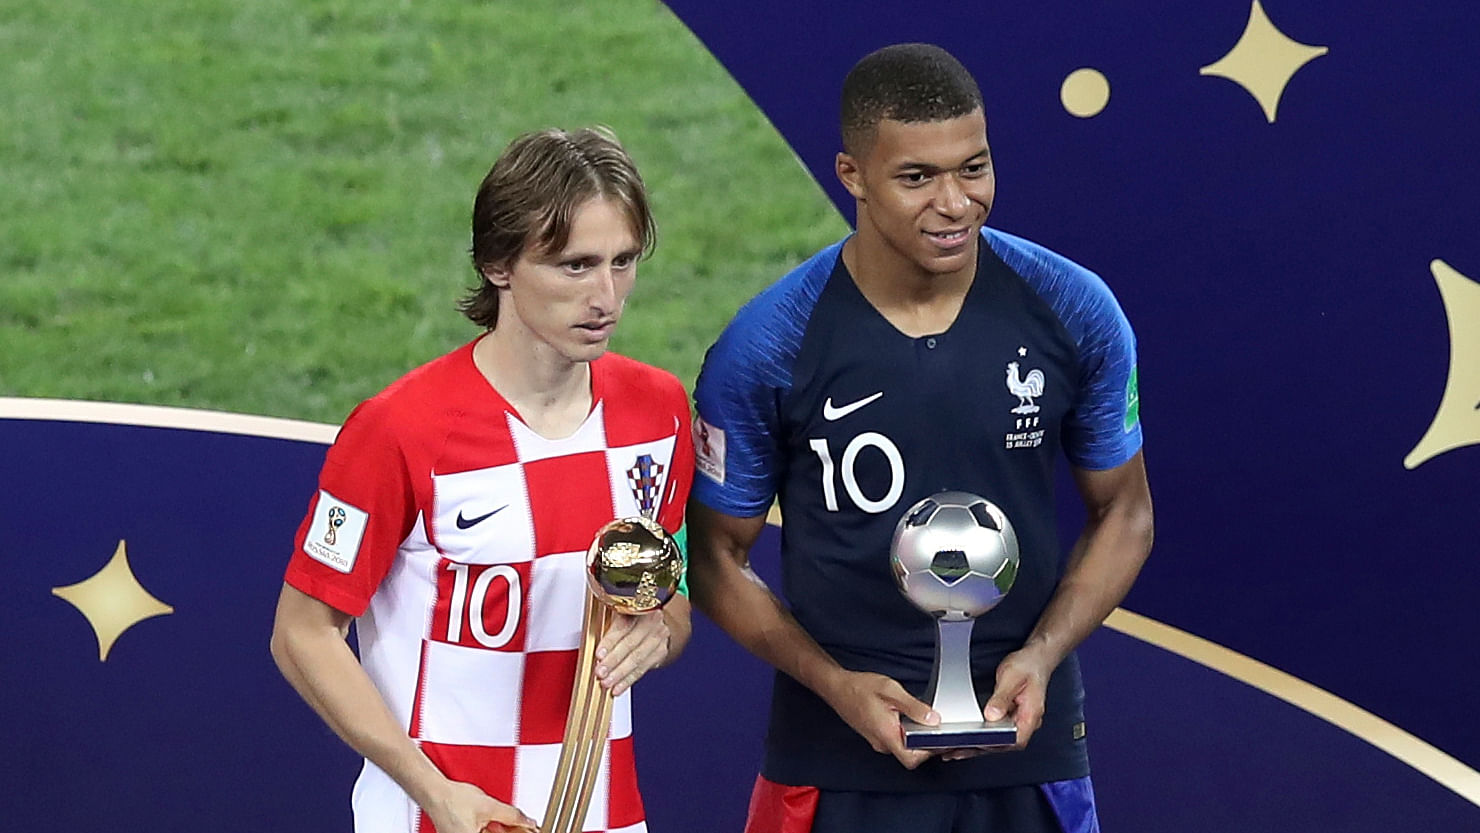 Croatia’s Luka Modric and France’s Kylian Mbappe, right, pose with their individual awards at the end of the final match between France and Croatia at the 2018 soccer World Cup in the Luzhniki Stadium in Moscow, Russia, Sunday, July 15, 2018.&nbsp;